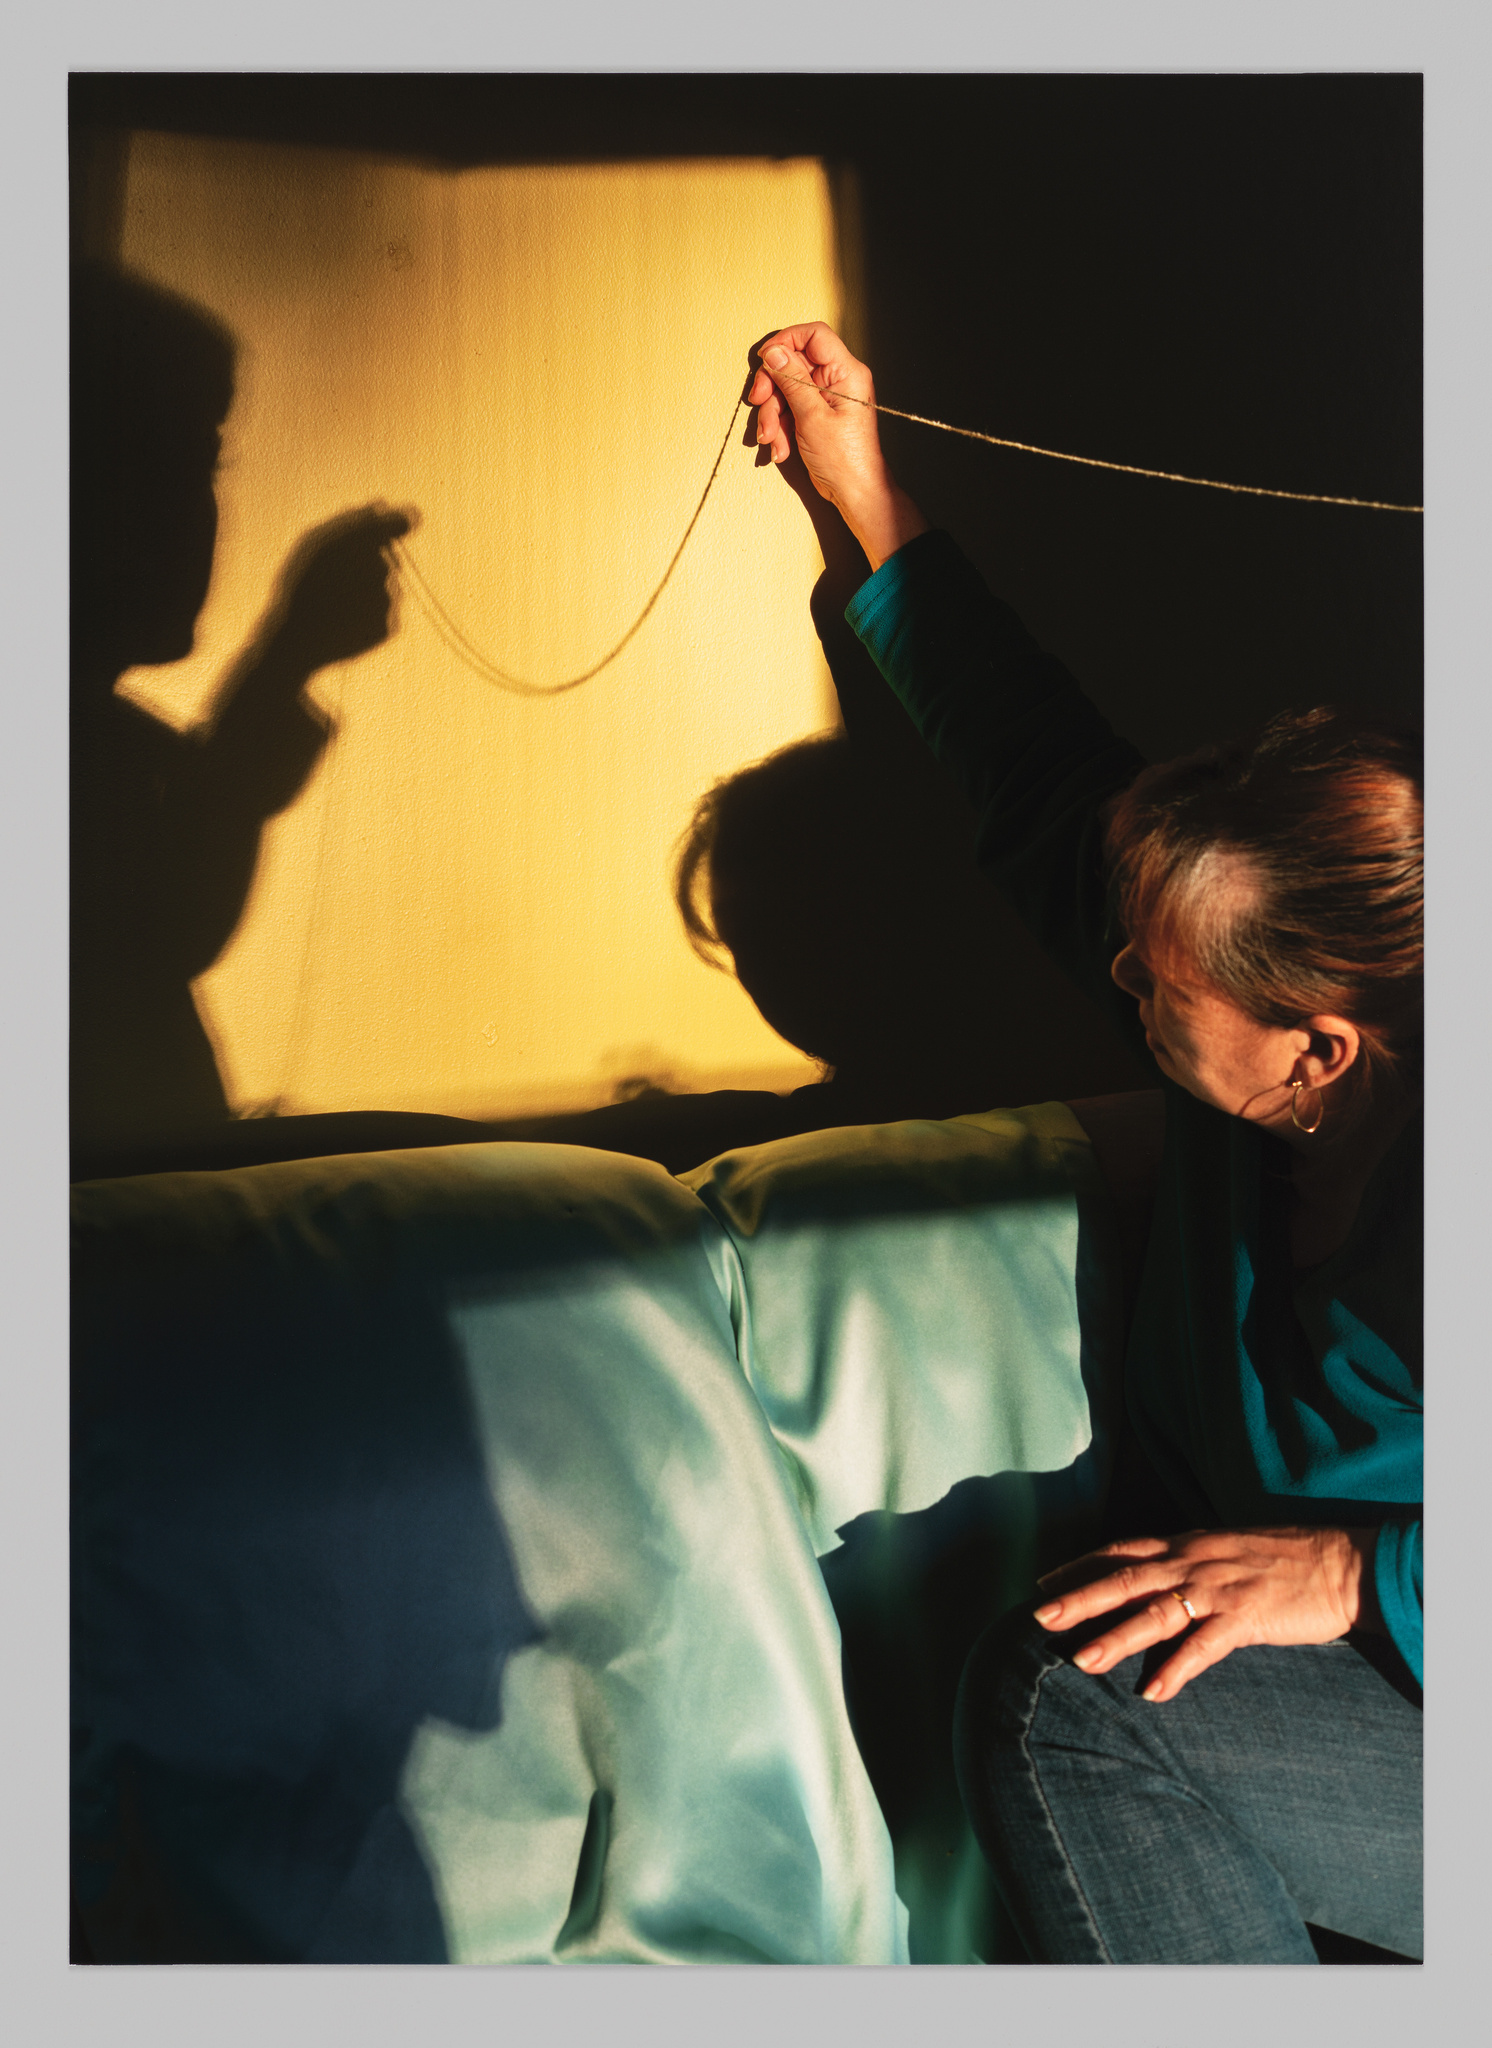 A string is held by two figures. One figure is only visible through their shadow, which darkens a square of light in the image background. The other figure is sitting on a blue couch with their arm stretched above them holding the string. The shadow of their face also appears in the square of light. 